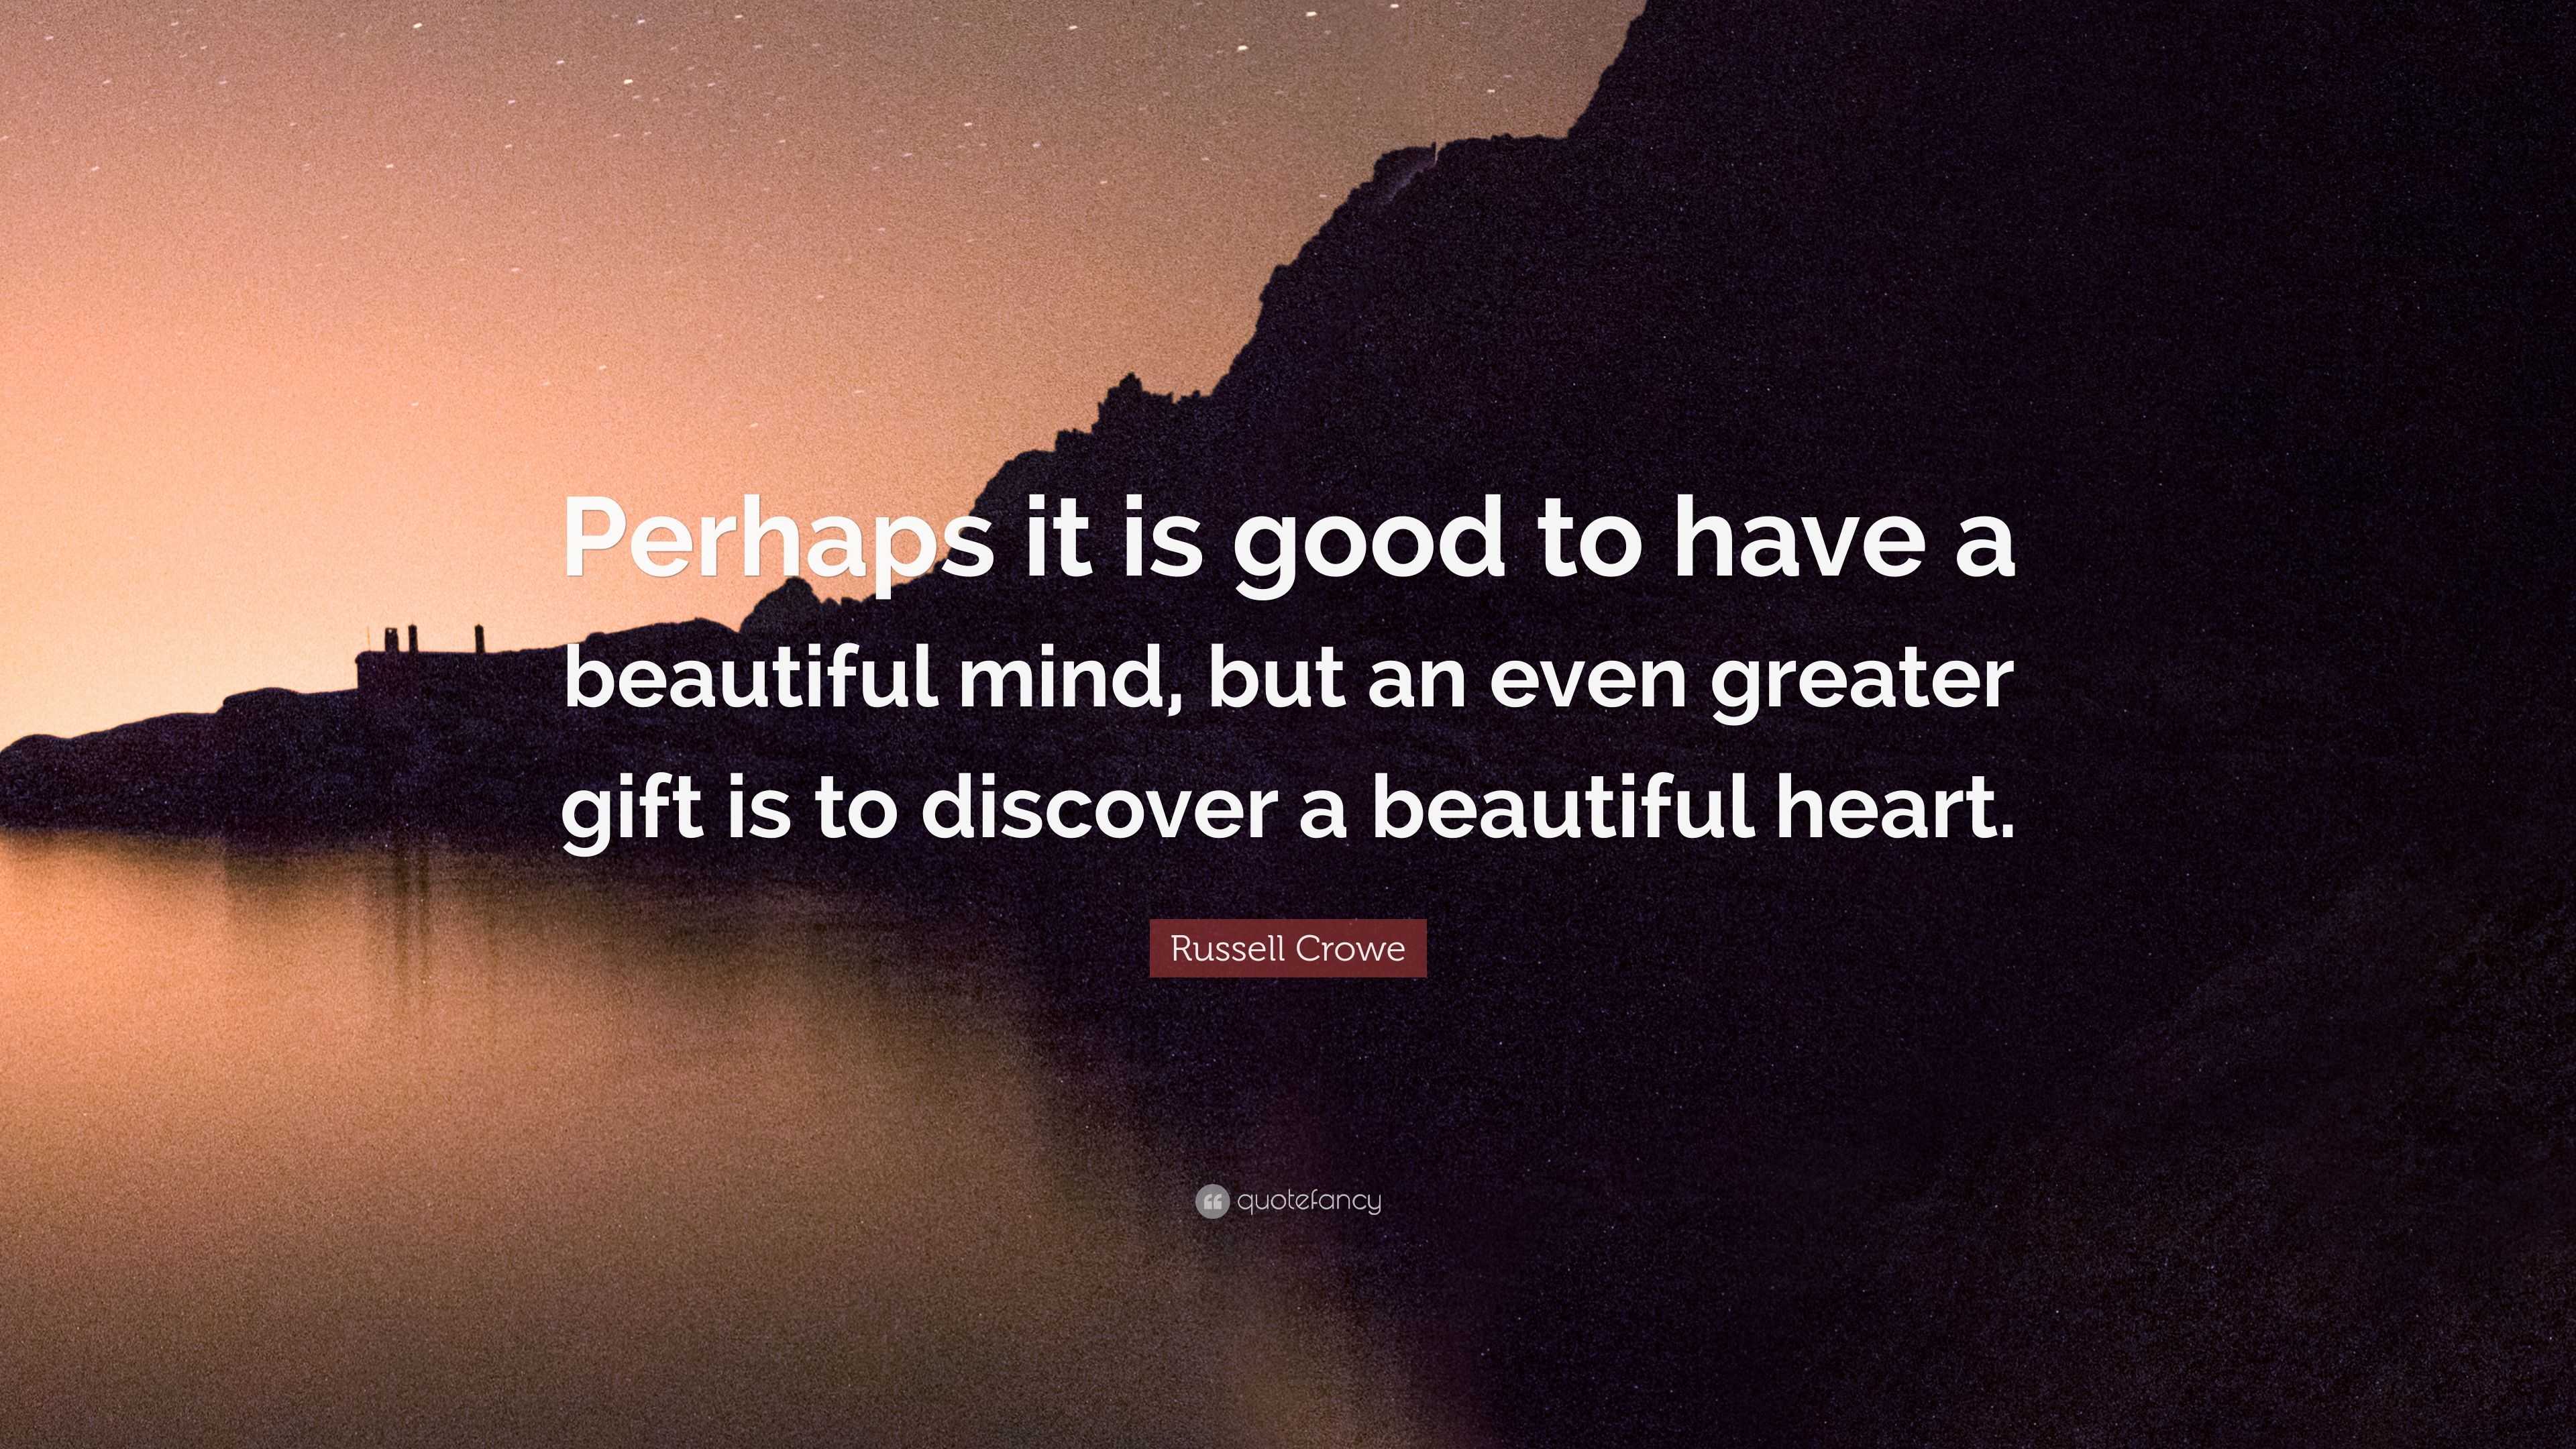 Russell Crowe Quote: “Perhaps it is good to have a beautiful mind, but ...